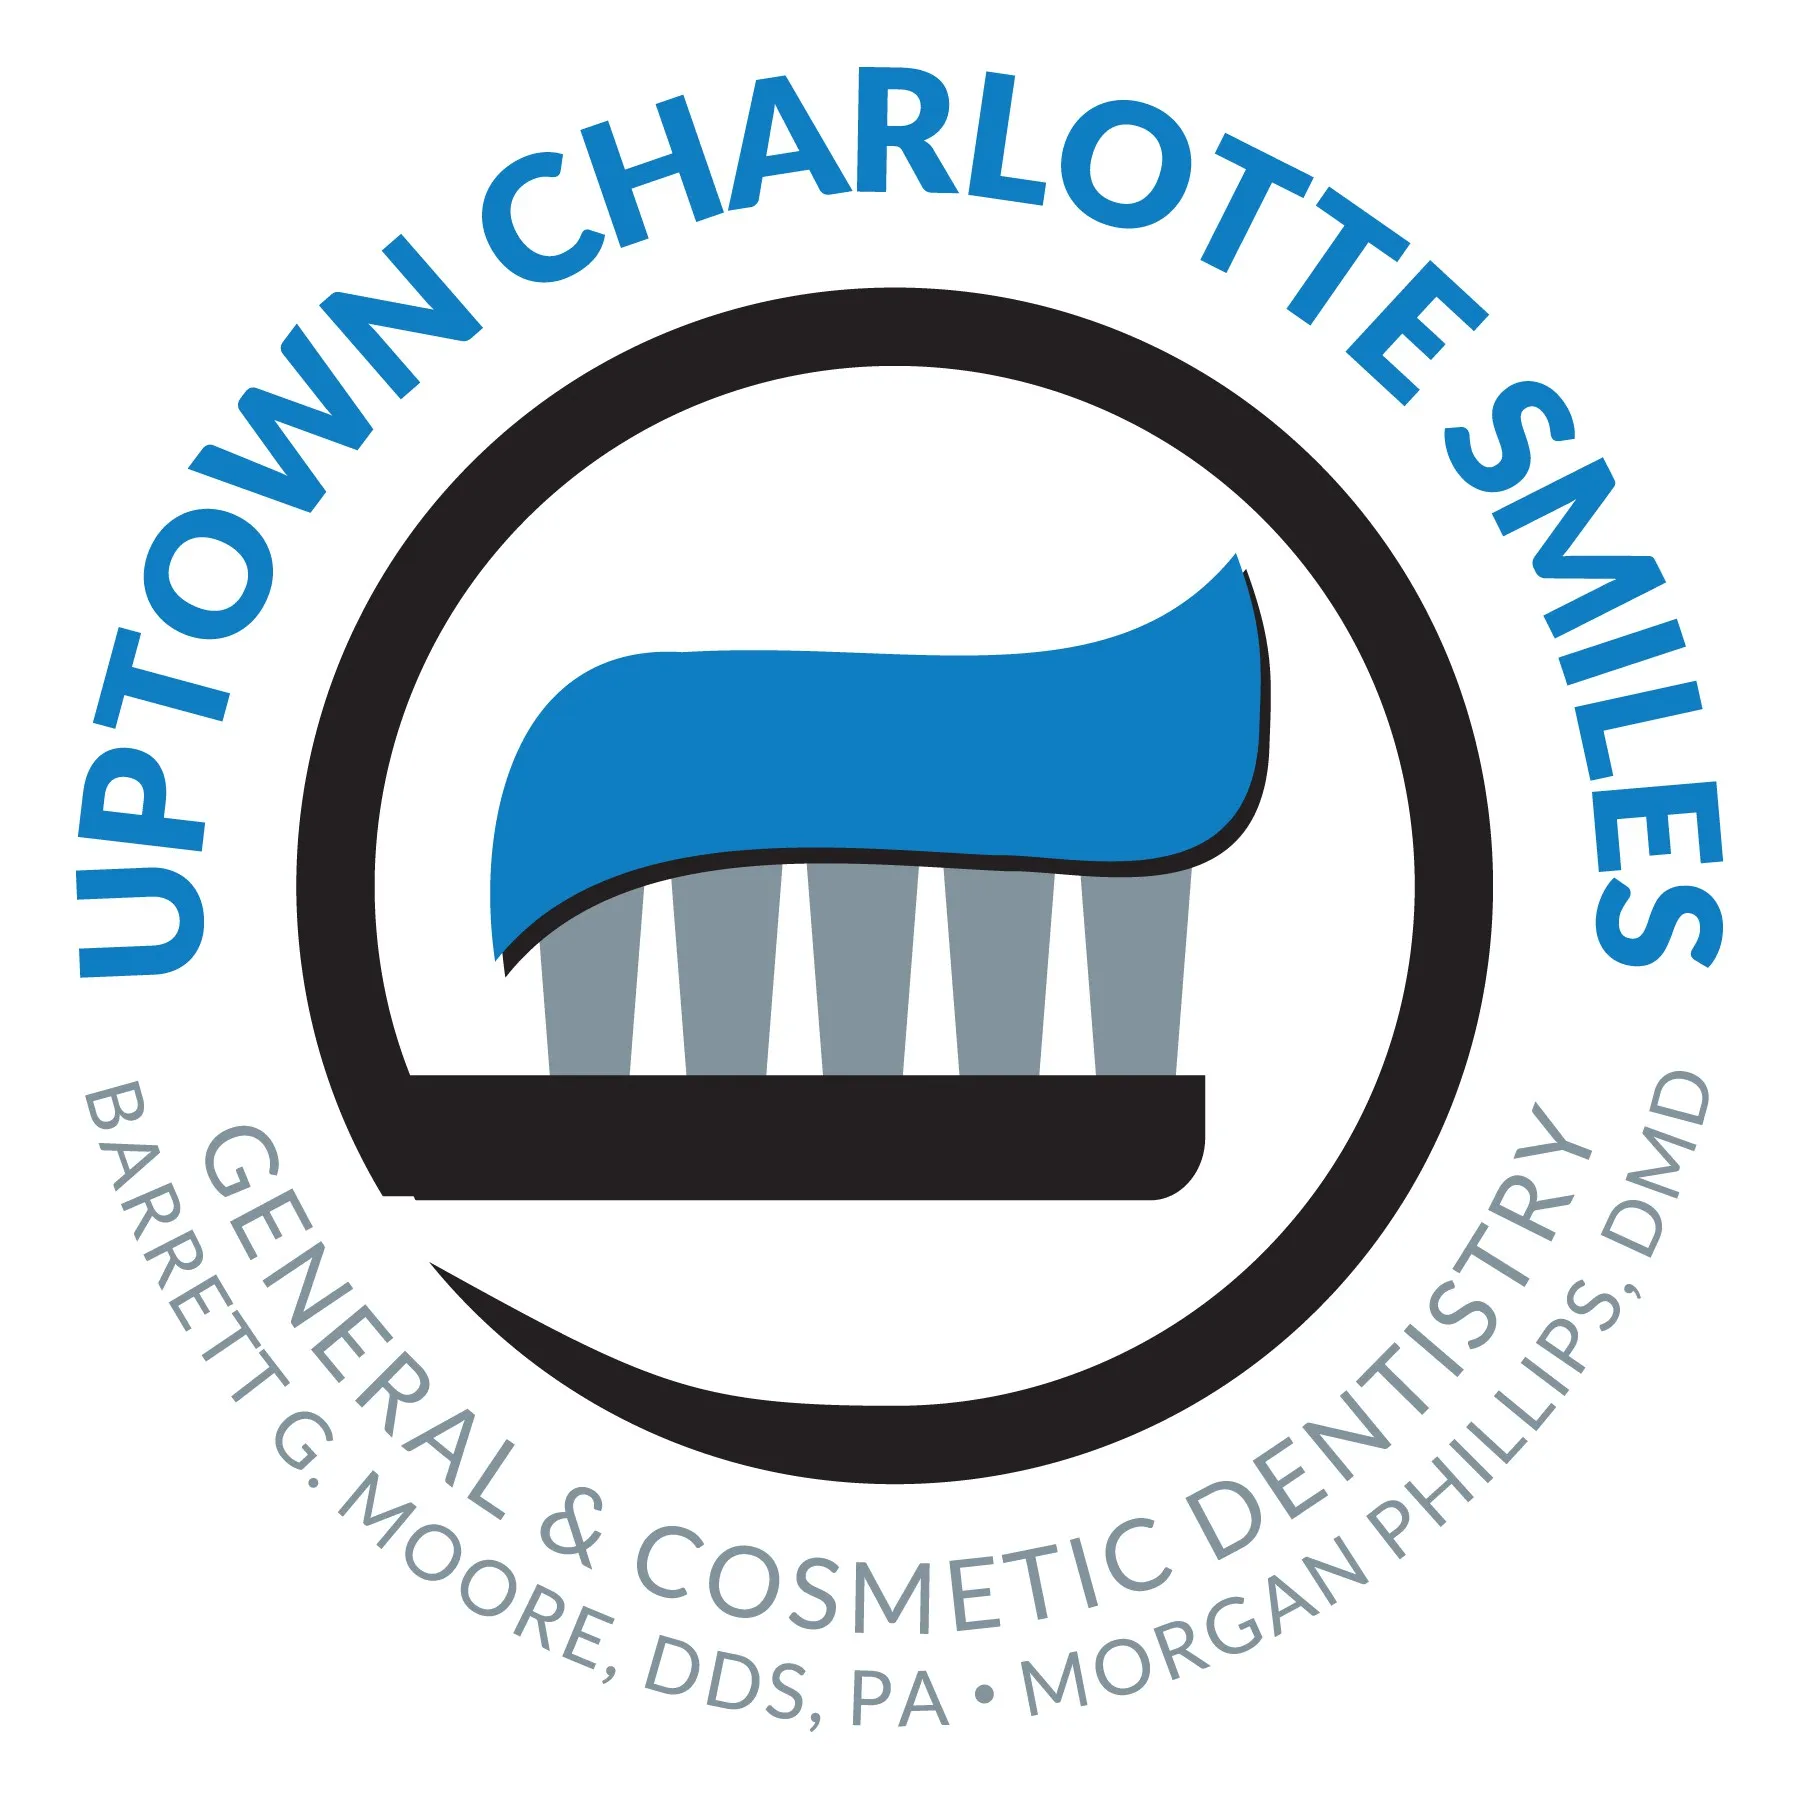 Link to Uptown Charlotte Smiles, the office of Barrett G. Moore, DDS, PA home page